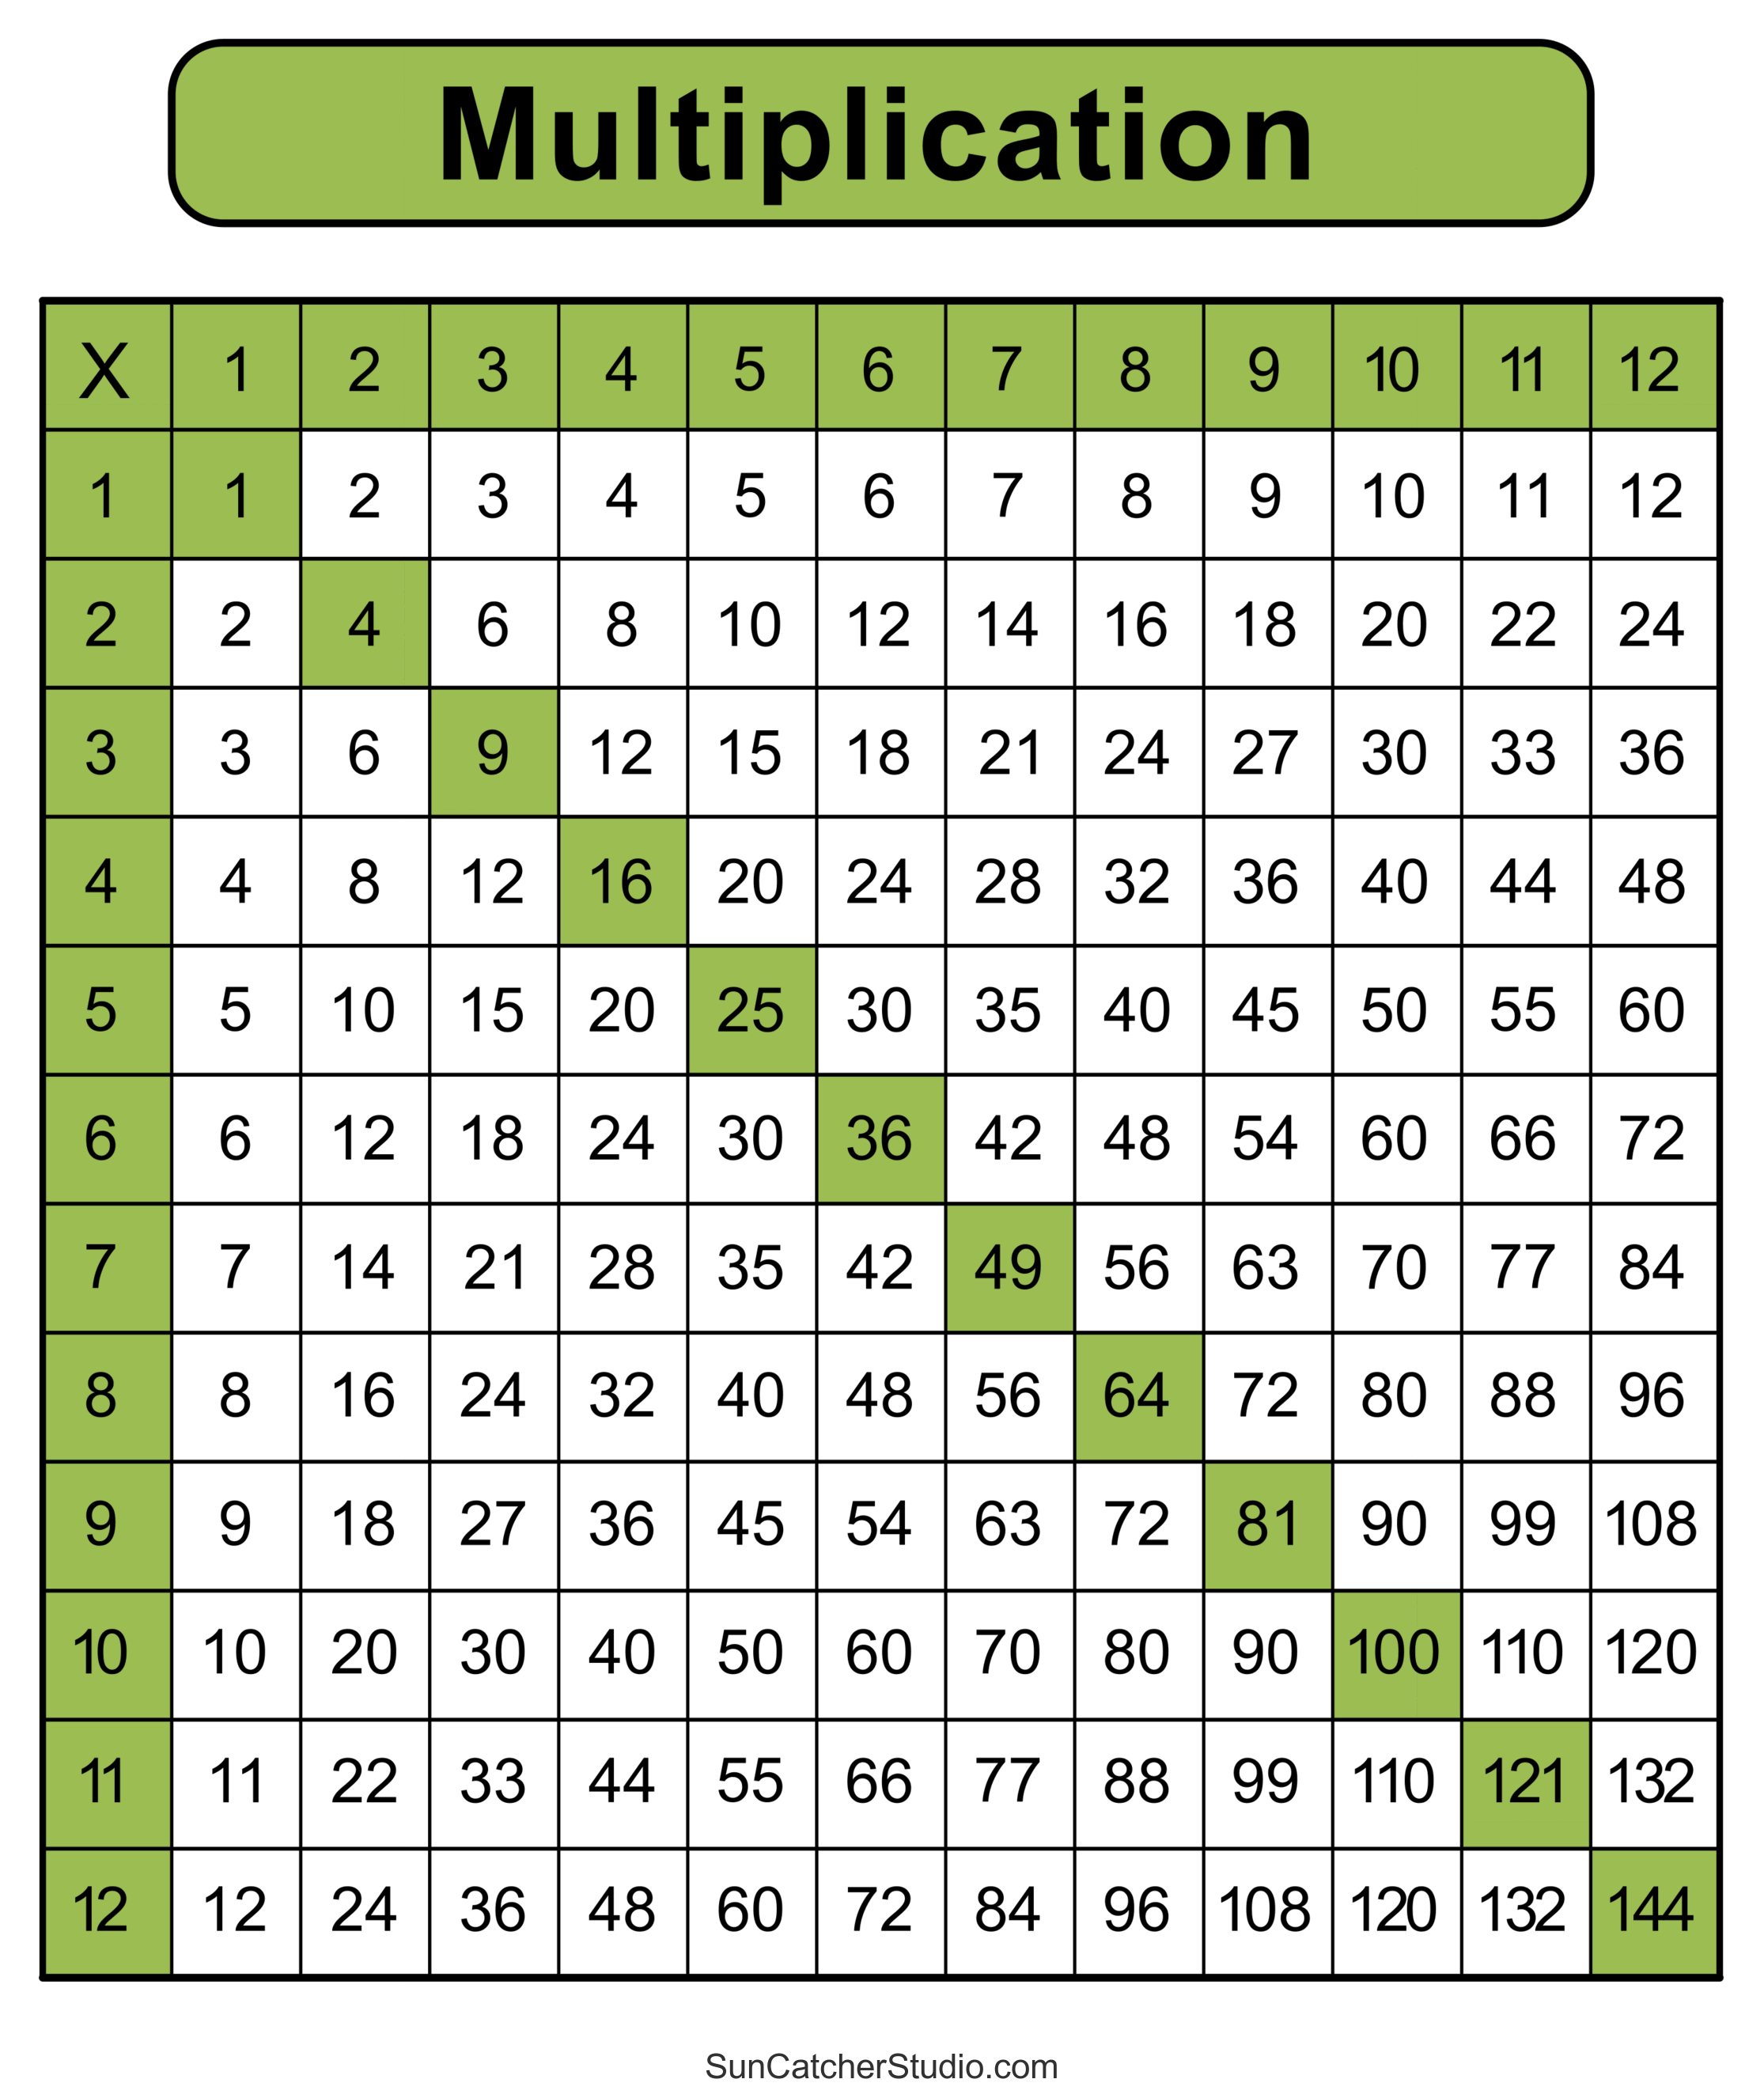 Multiplication Table To 60 4789